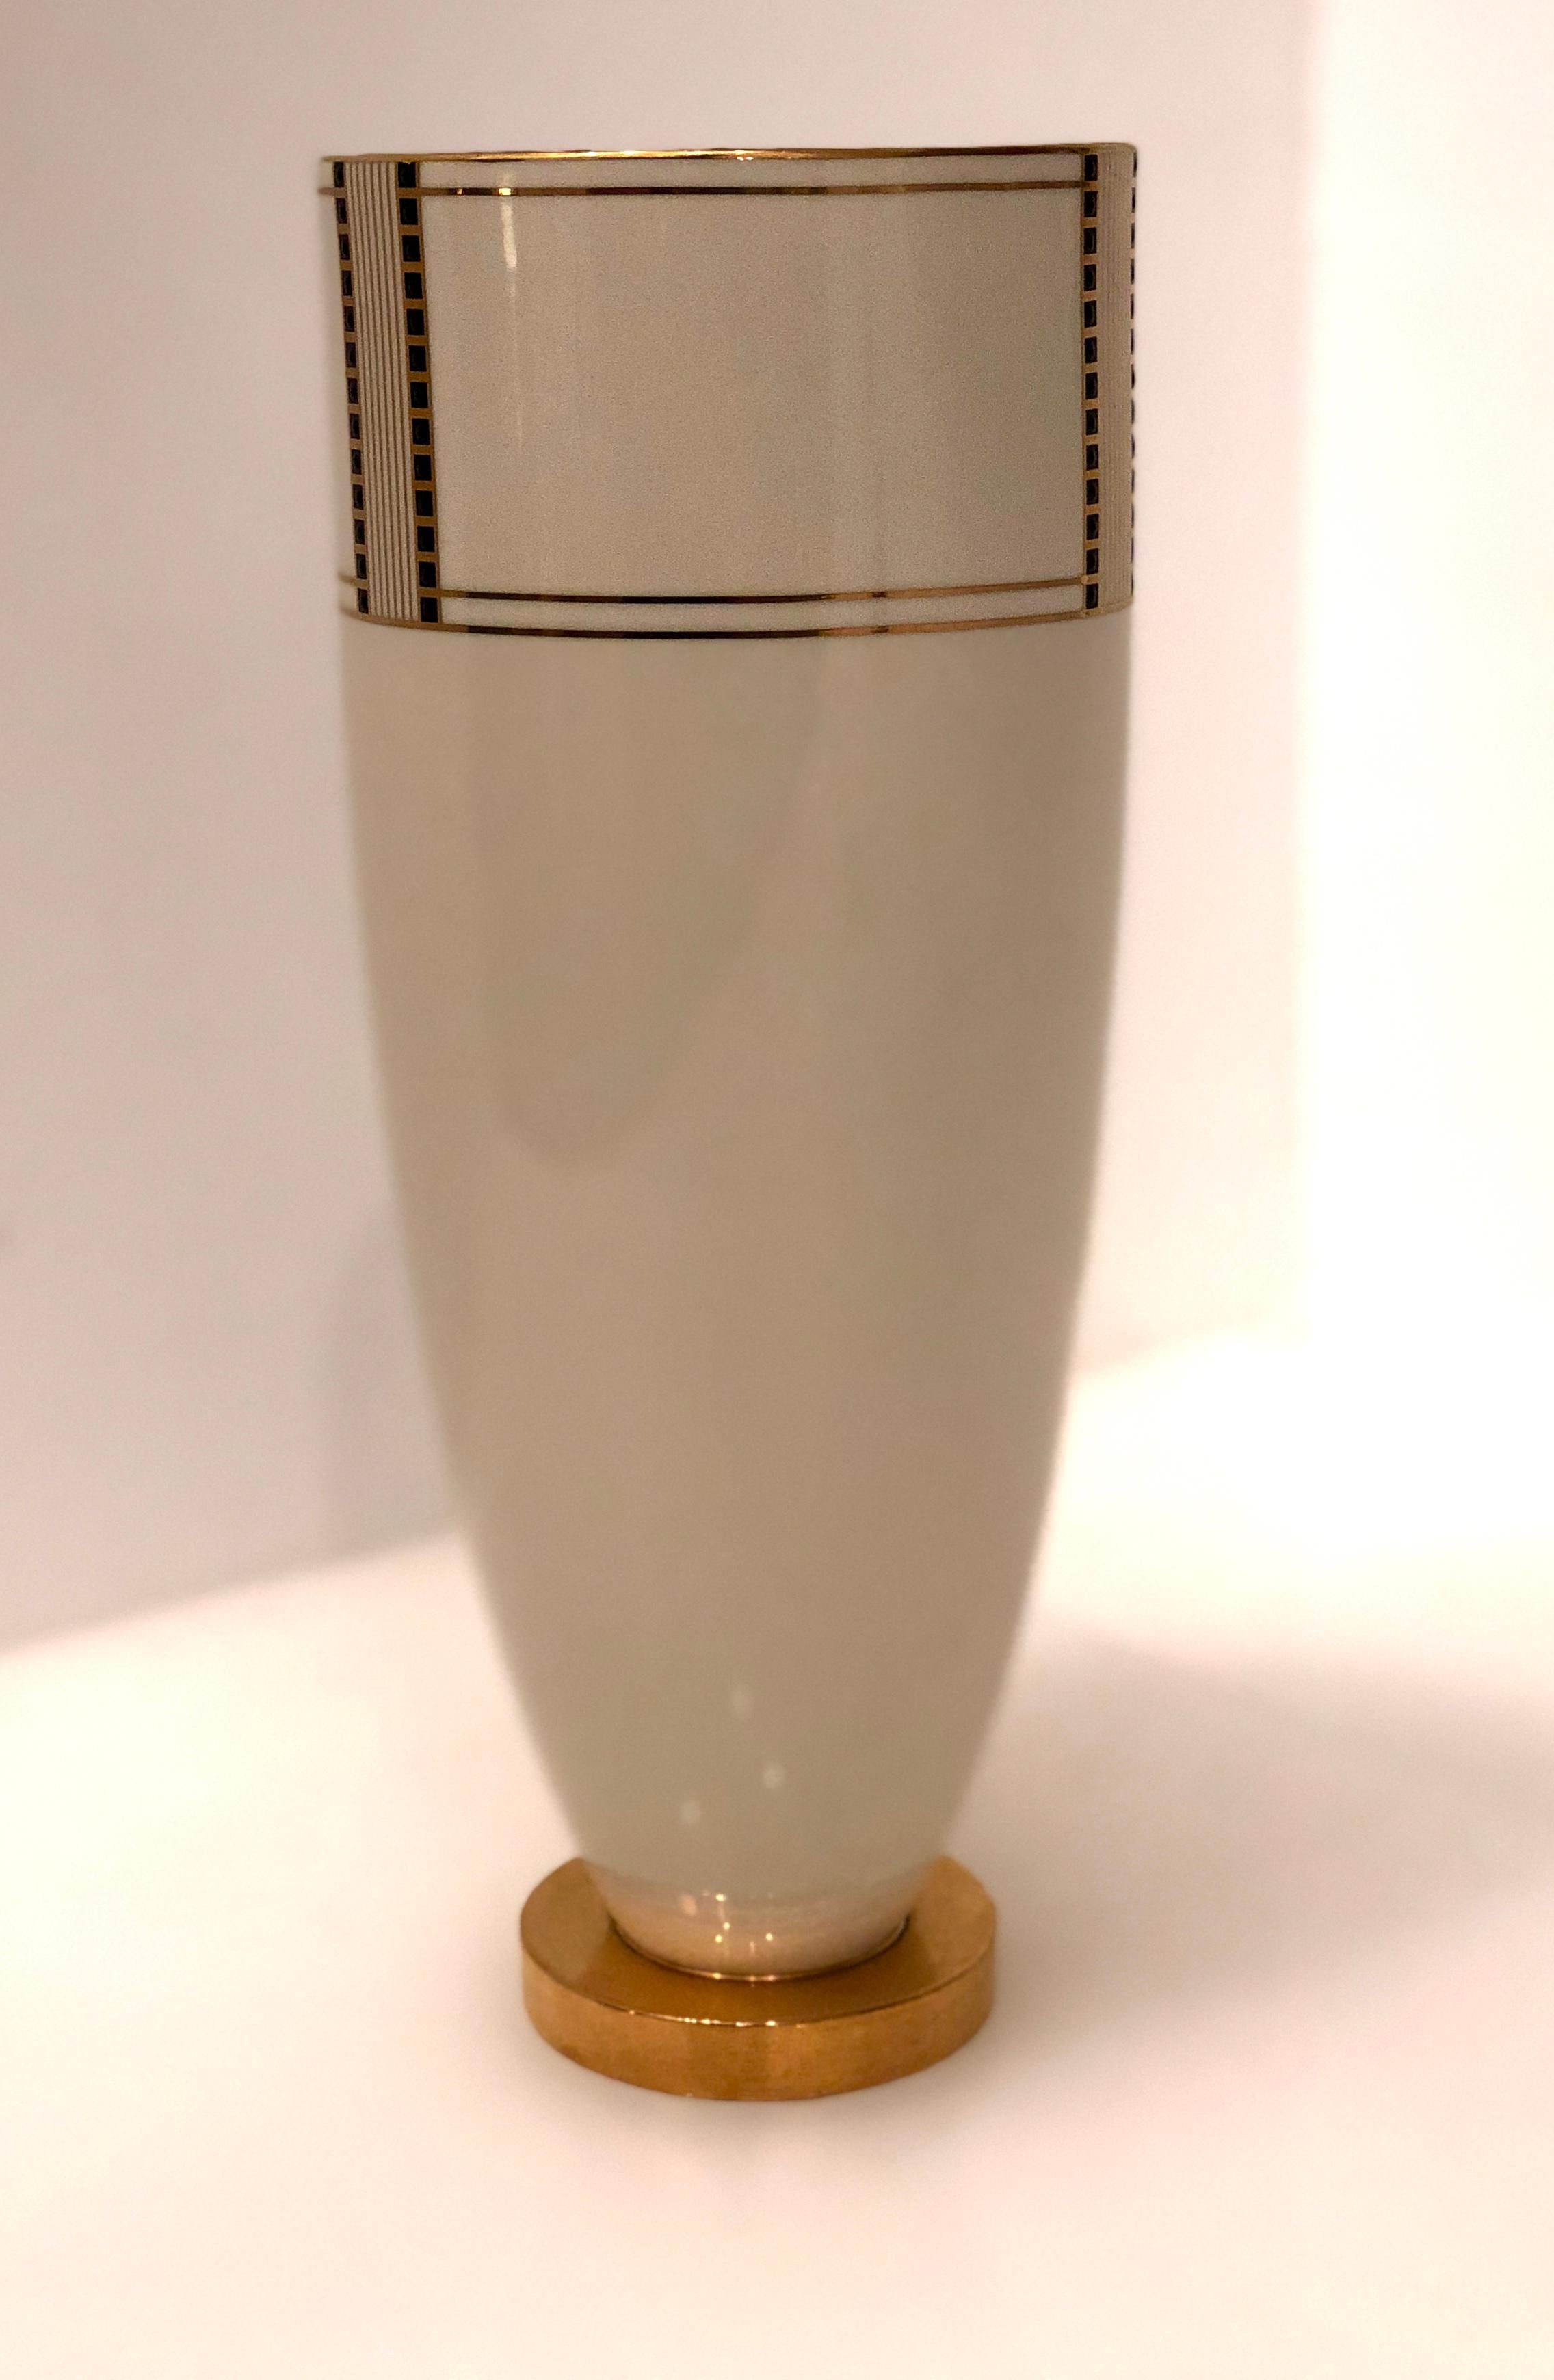 Elegant porcelain vase with gold leaf accents and nice post modern details from the Lenox Jeweled Essence collection. In excellent condition no chips or cracks, circa 1980s.